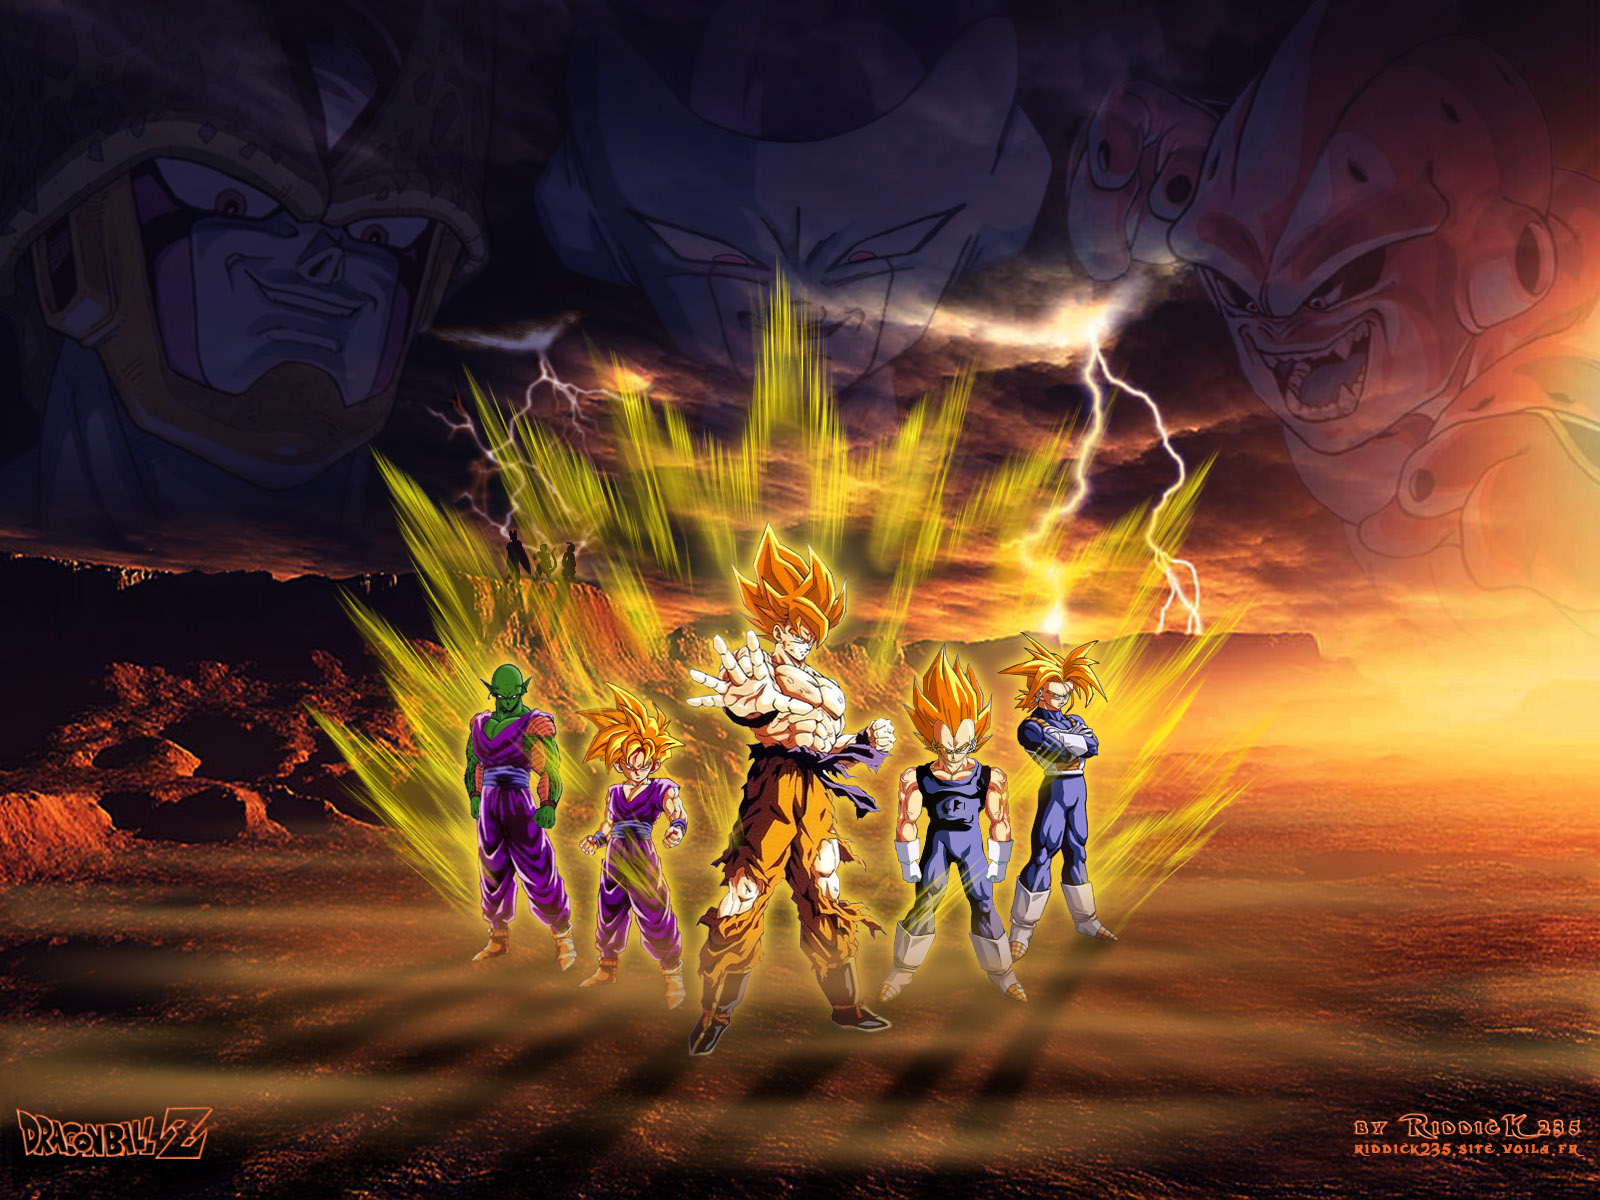 Dragon Ball 17 Wallpaper - Wallpapers And Pictures